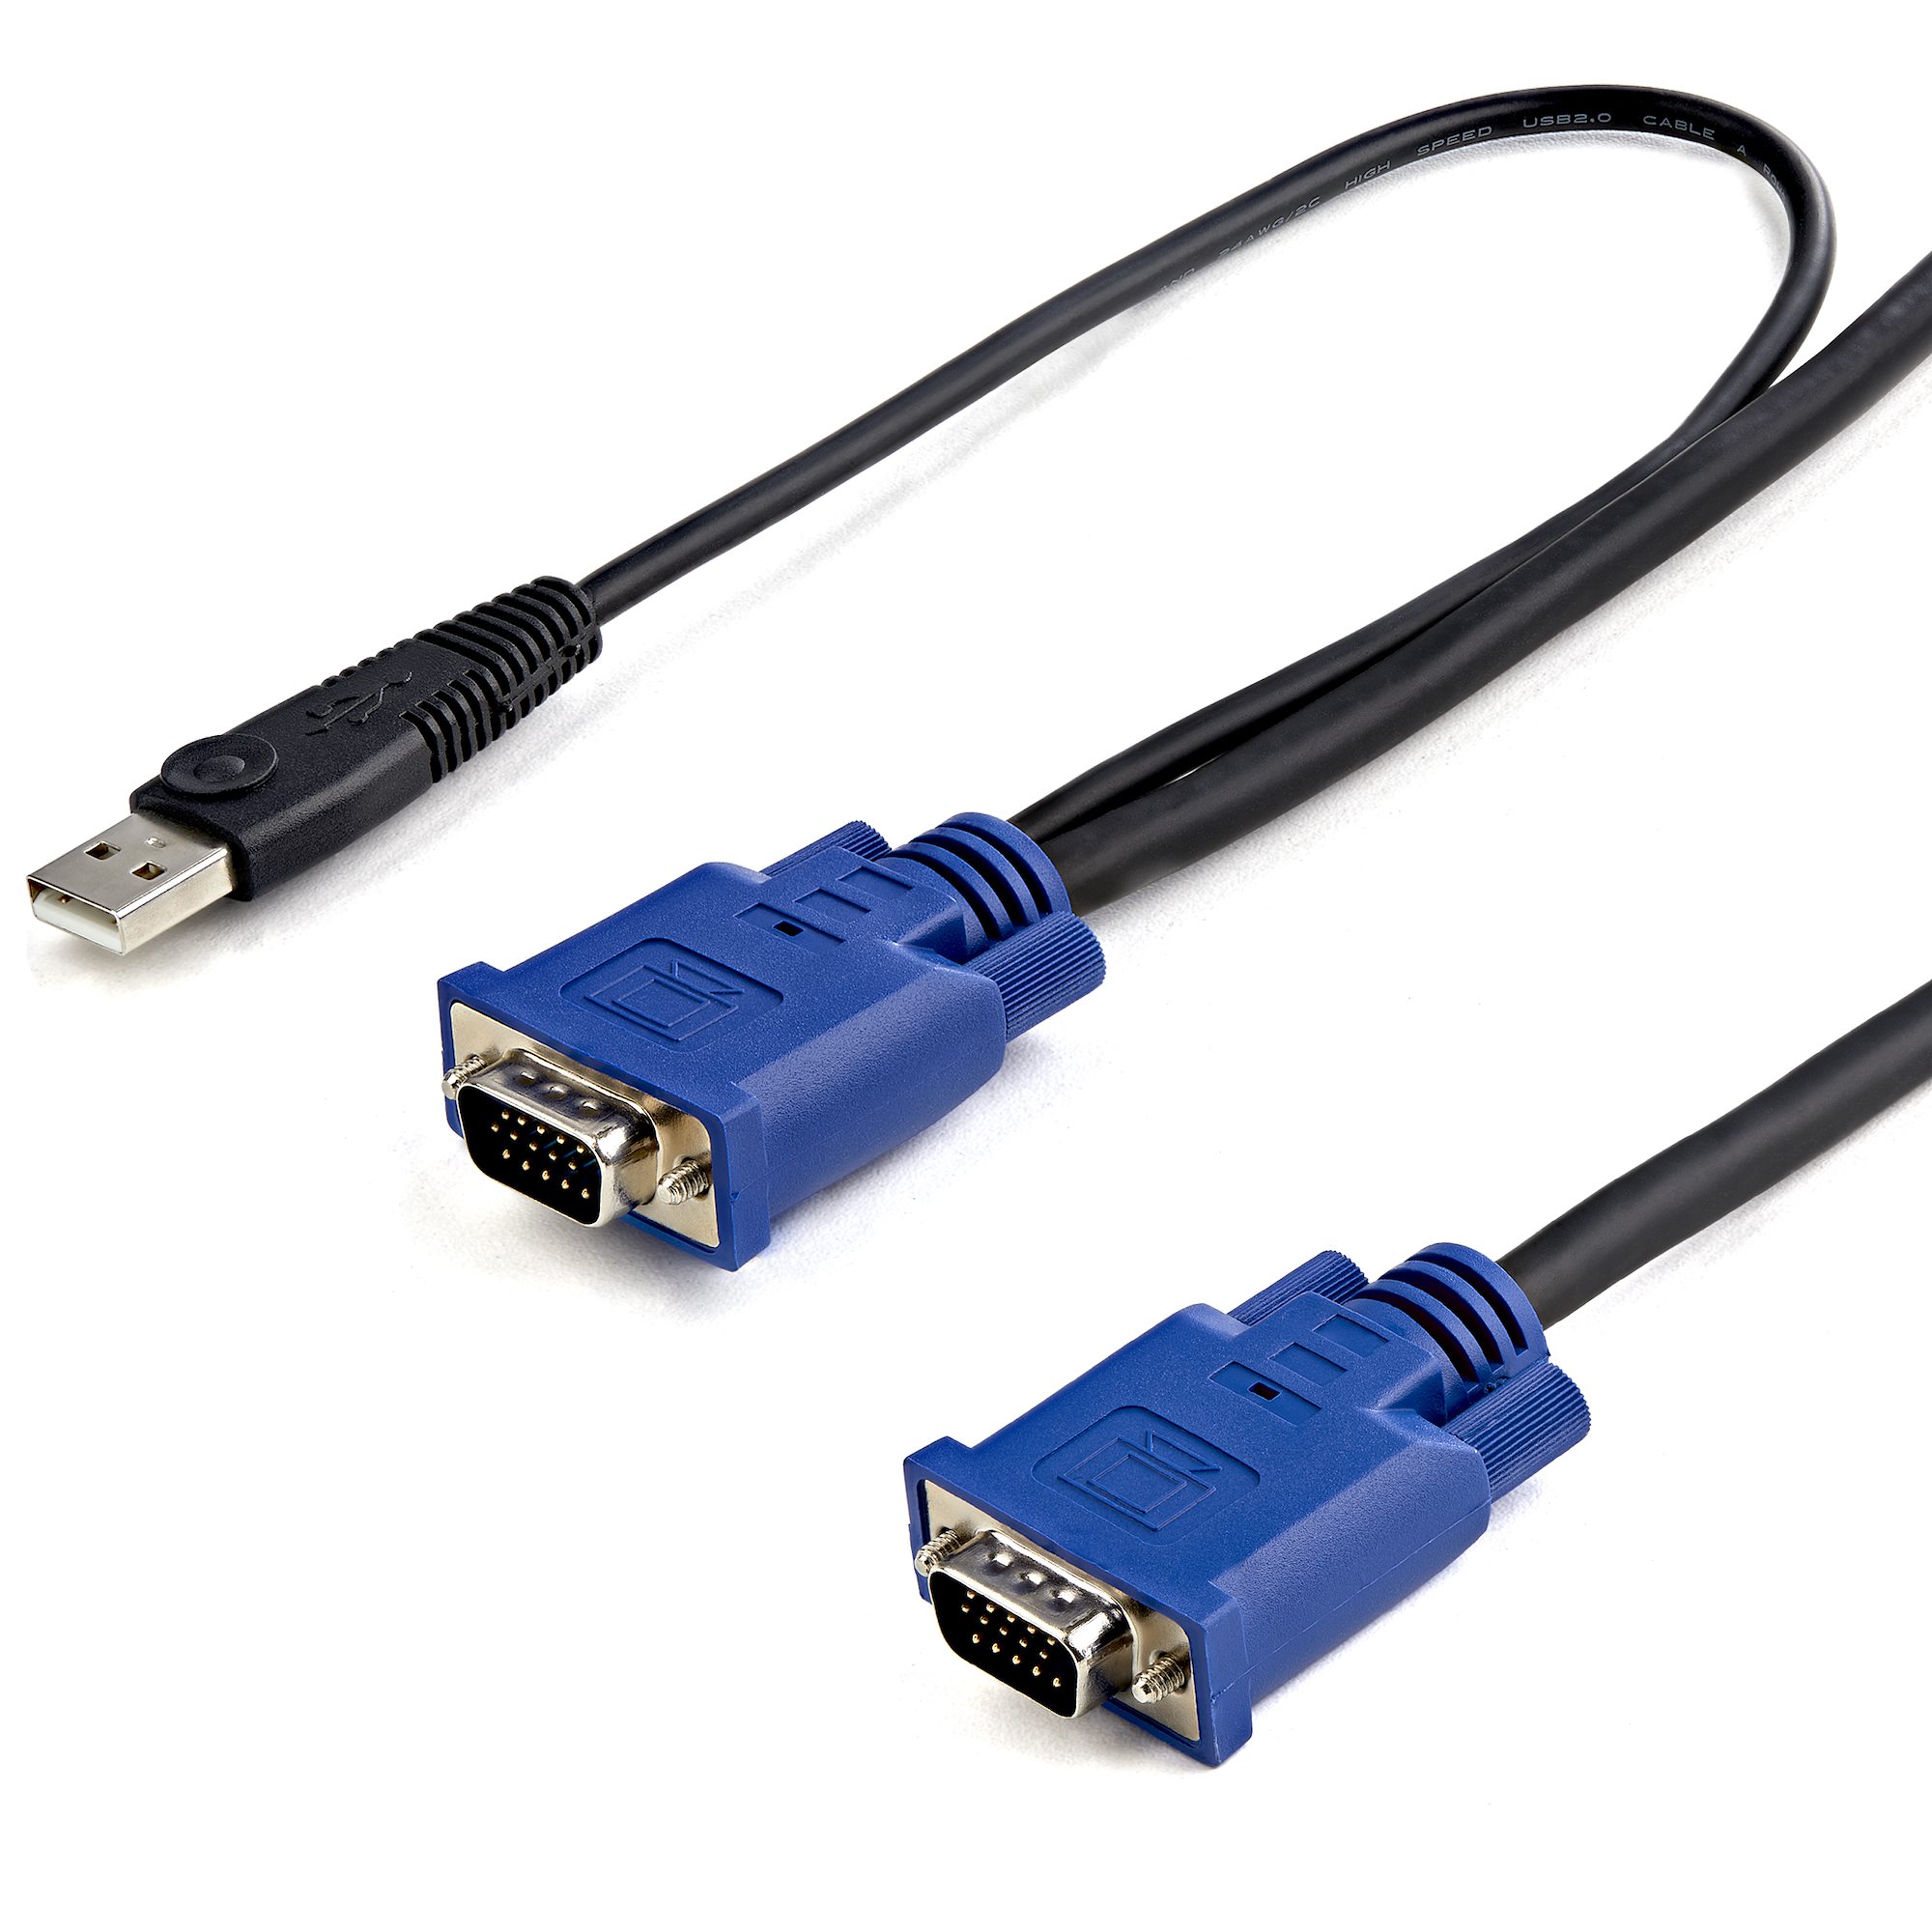 10 ft Ultra Thin USB VGA 2-in-1 KVM Cable - BCI Imaging Supplies